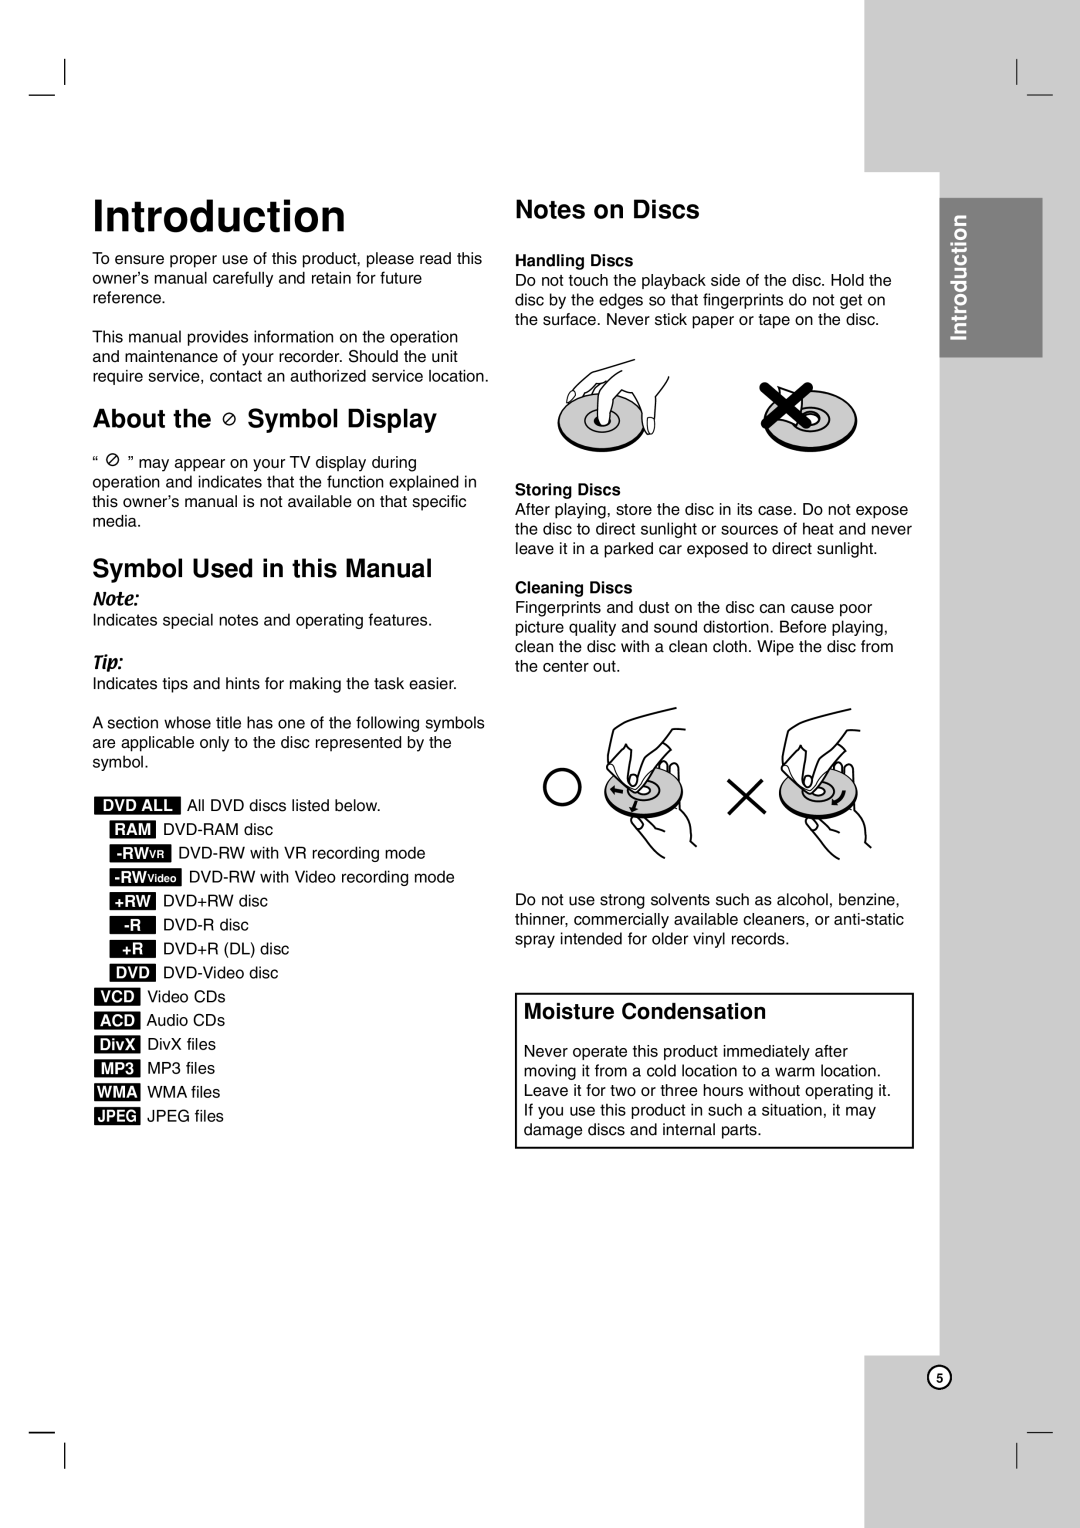 LG Electronics DR1F9H Introduction, About the Symbol Display, Symbol Used in this Manual, Notes on Discs, Handling Discs 